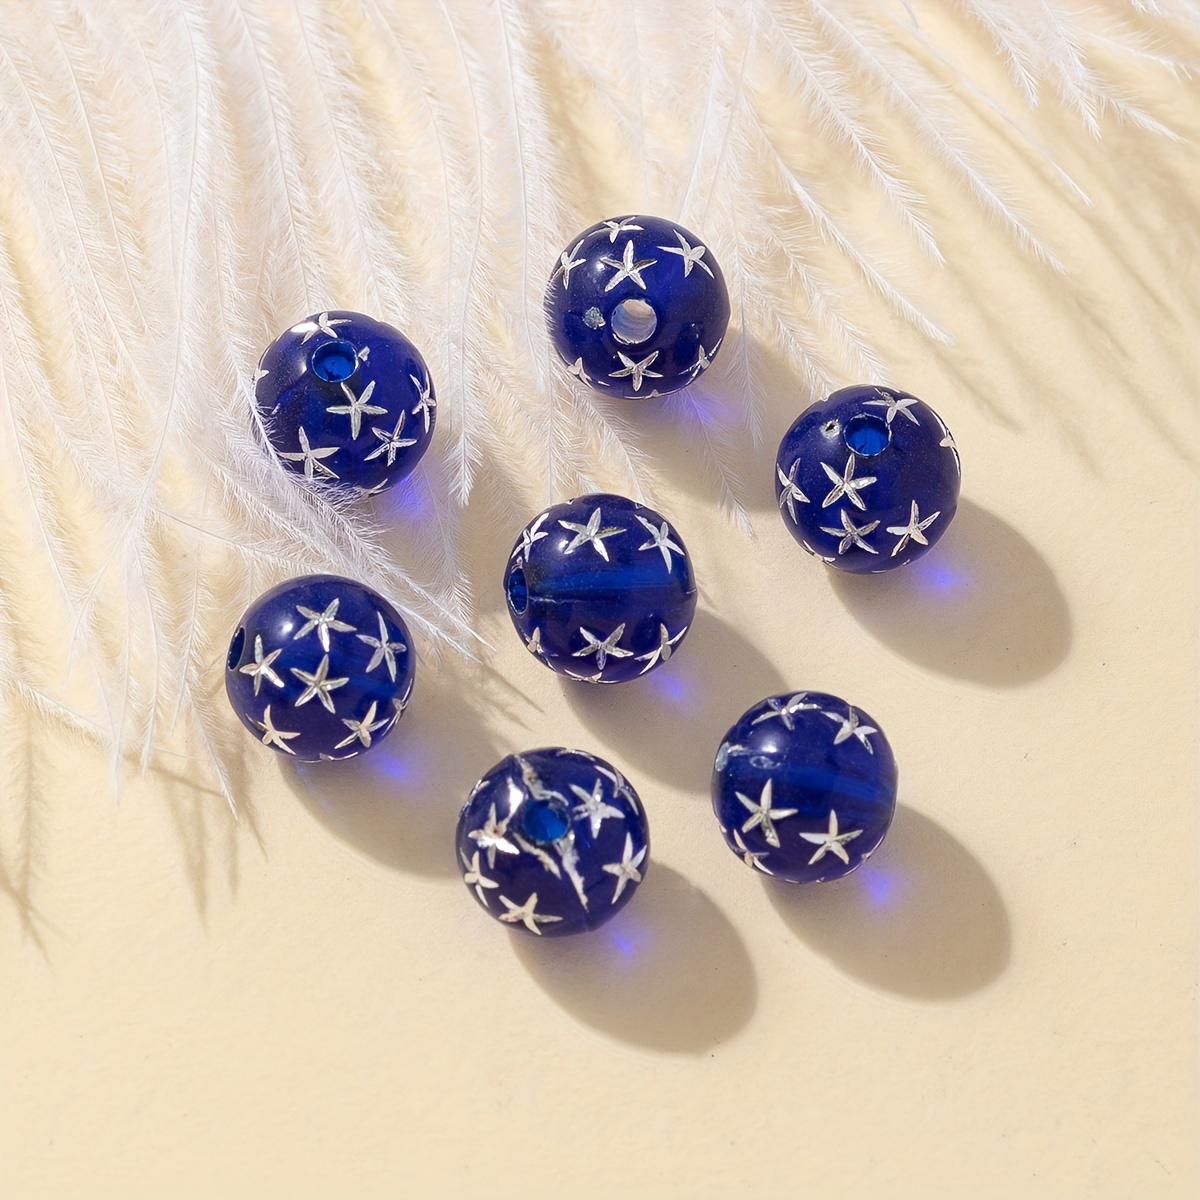 

30pcs Vintage Blue Star Beads For Jewelry Making Diy Special Fashion Necklace Bracelet Handmade Craft Supplies